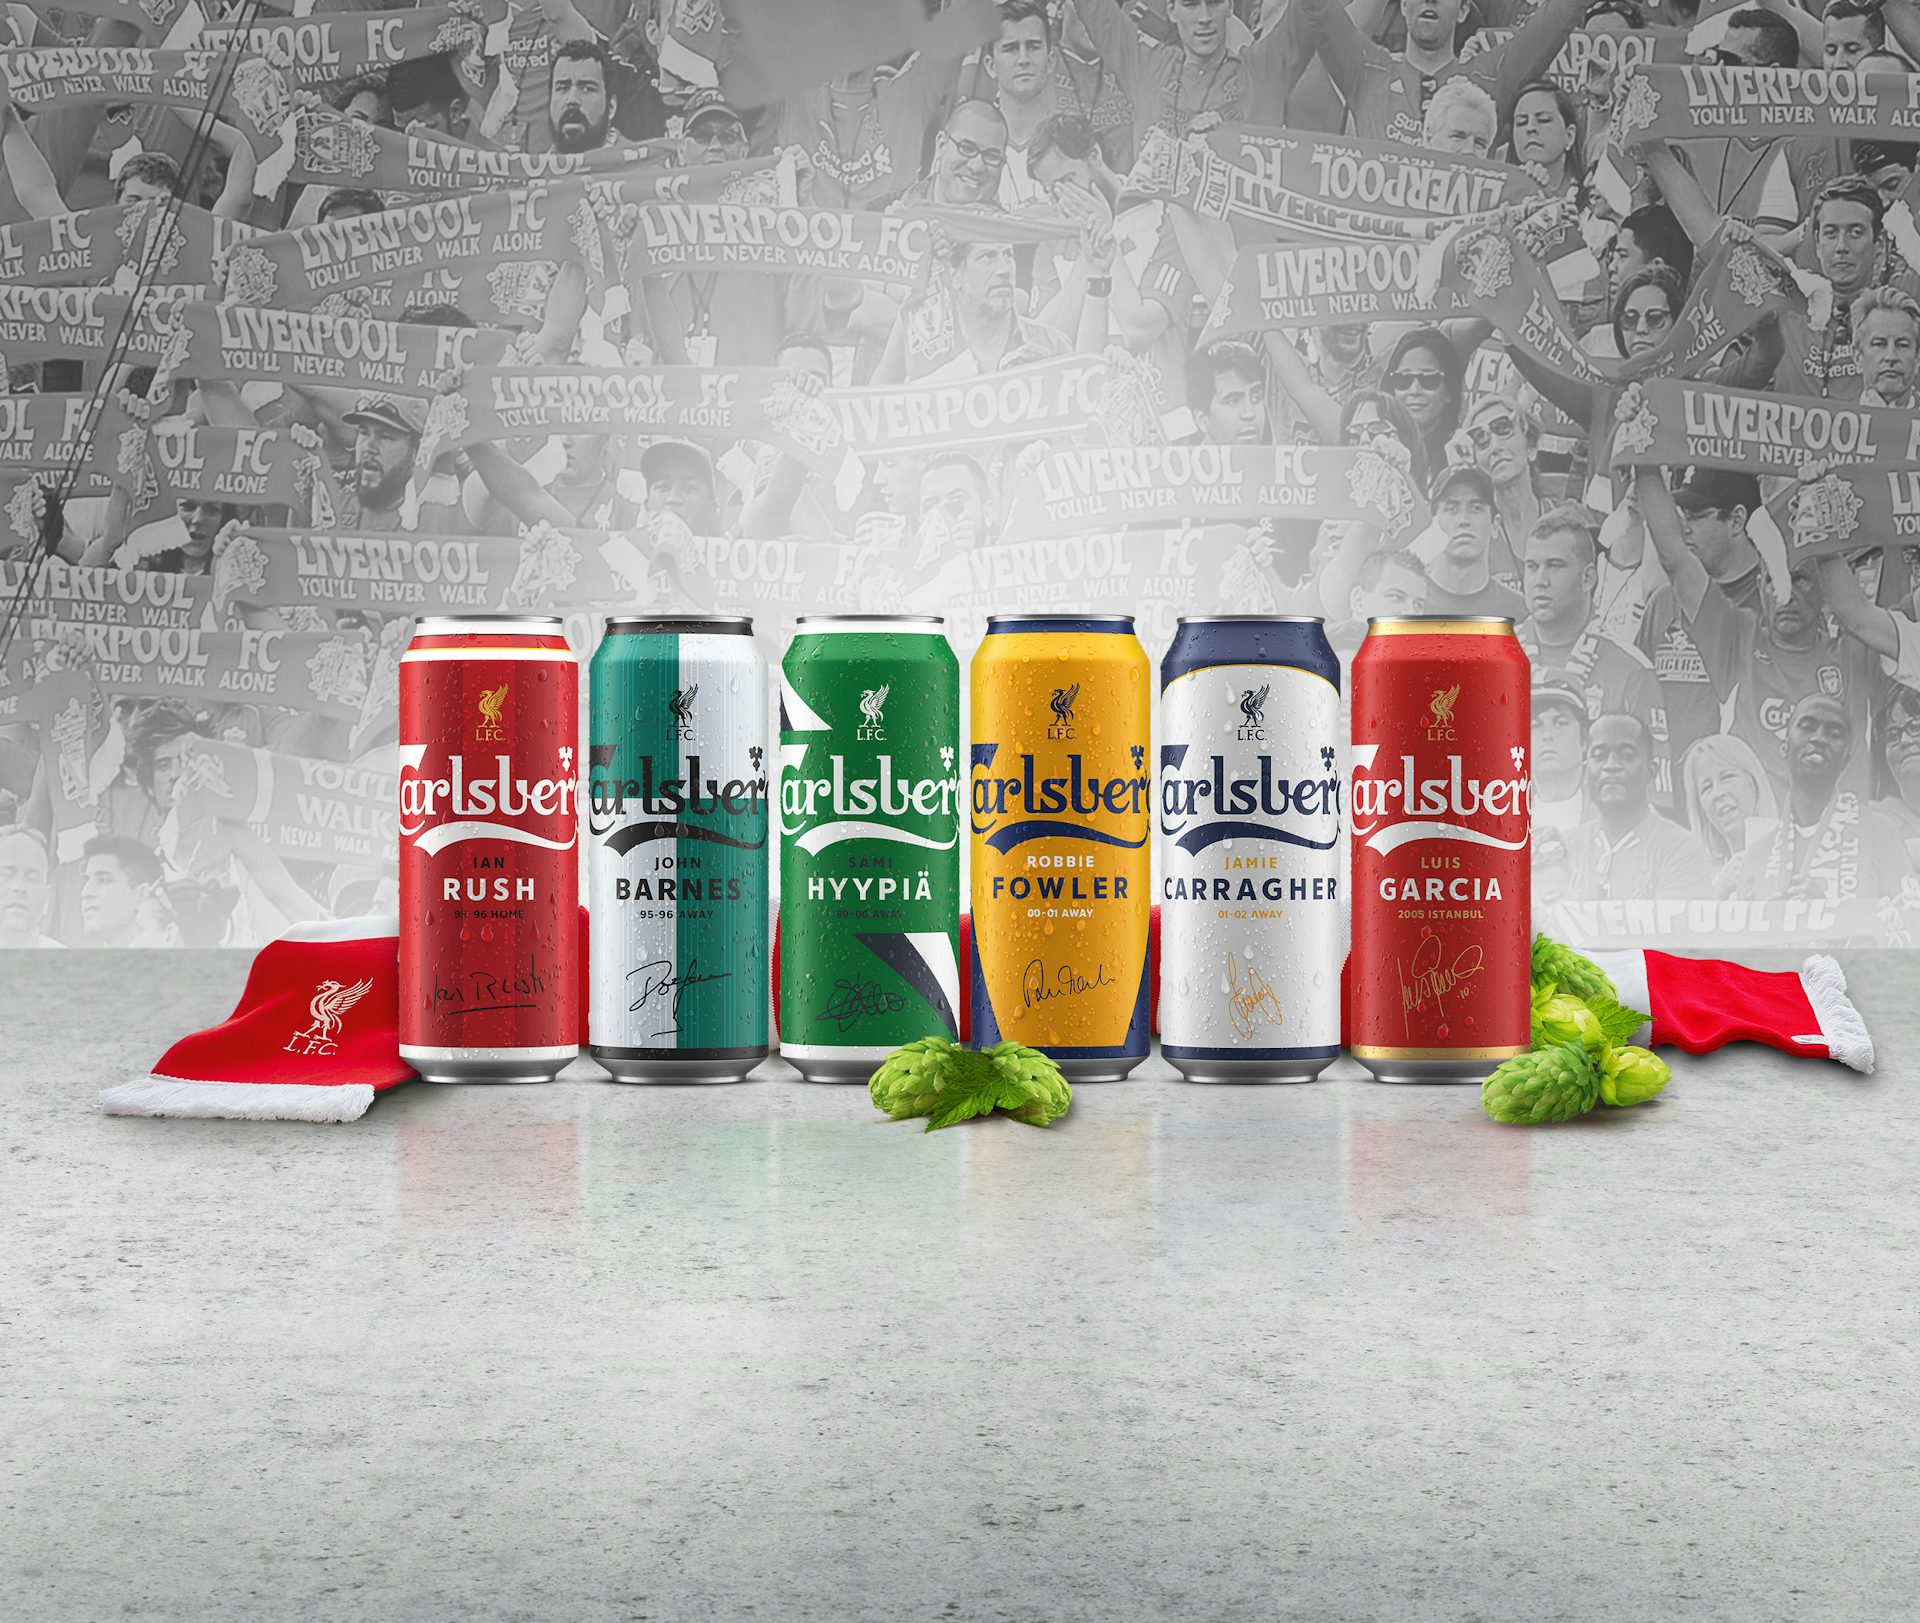 Taxi Studio, Carlsberg Liverpool FC 30 Years limited-edition beer cans